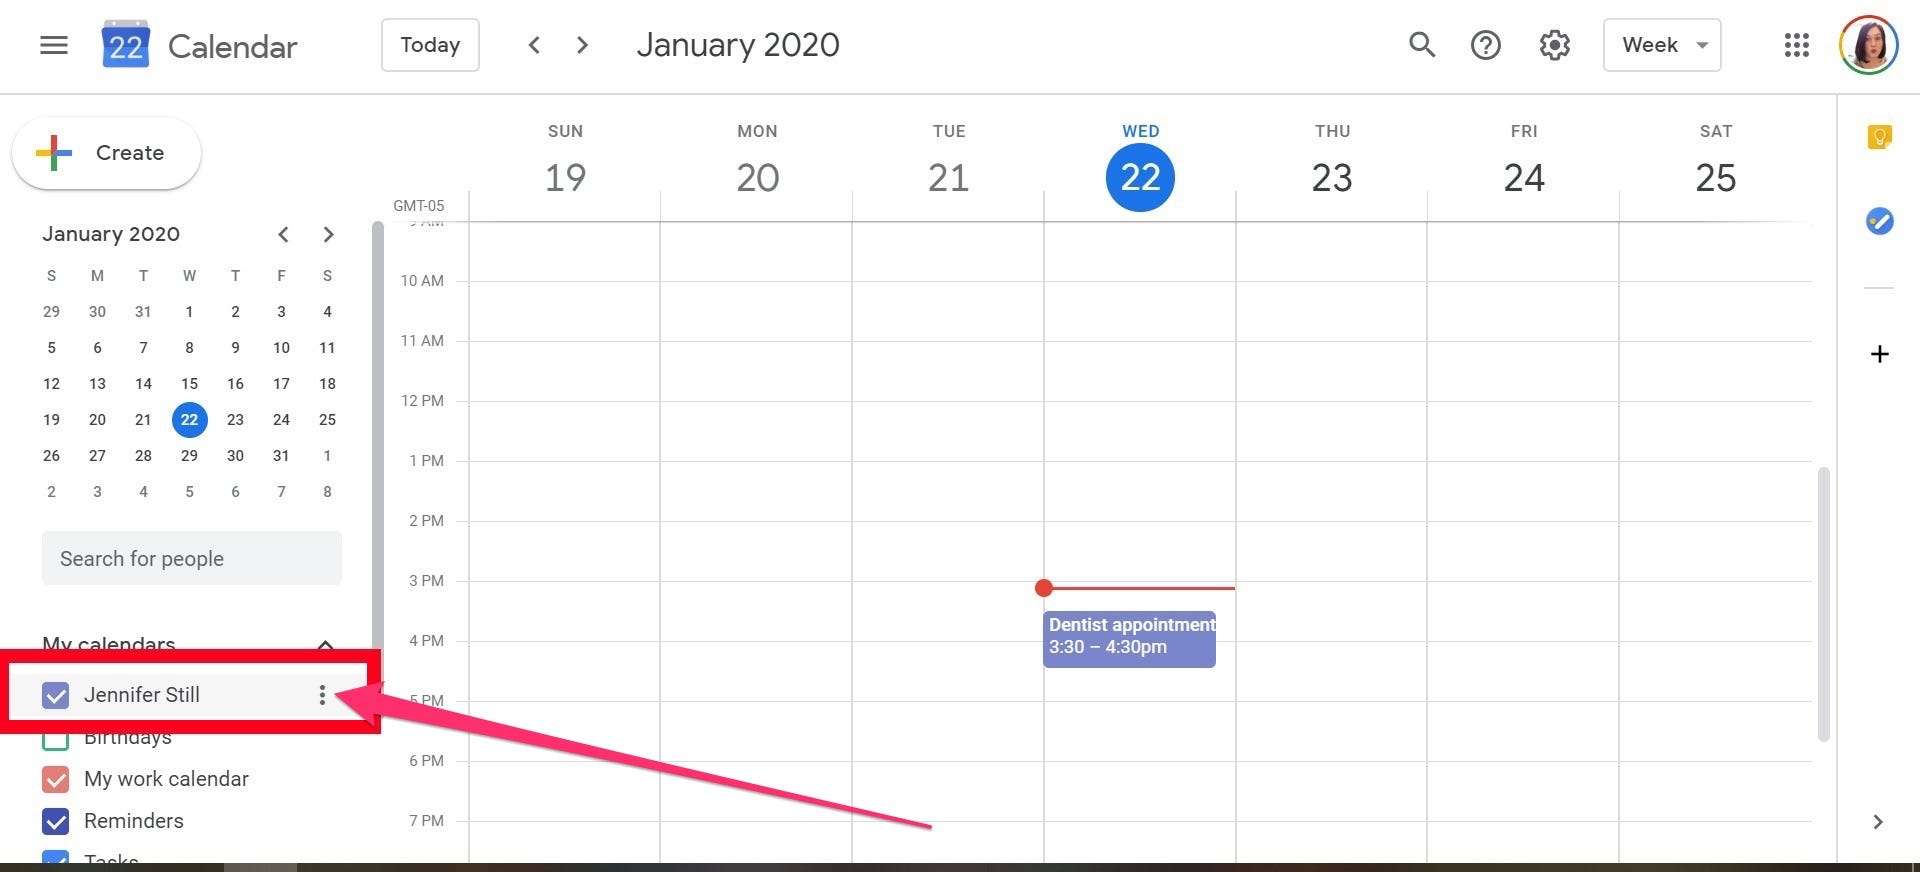 How to change the colors on your Google Calendar to differentiate your